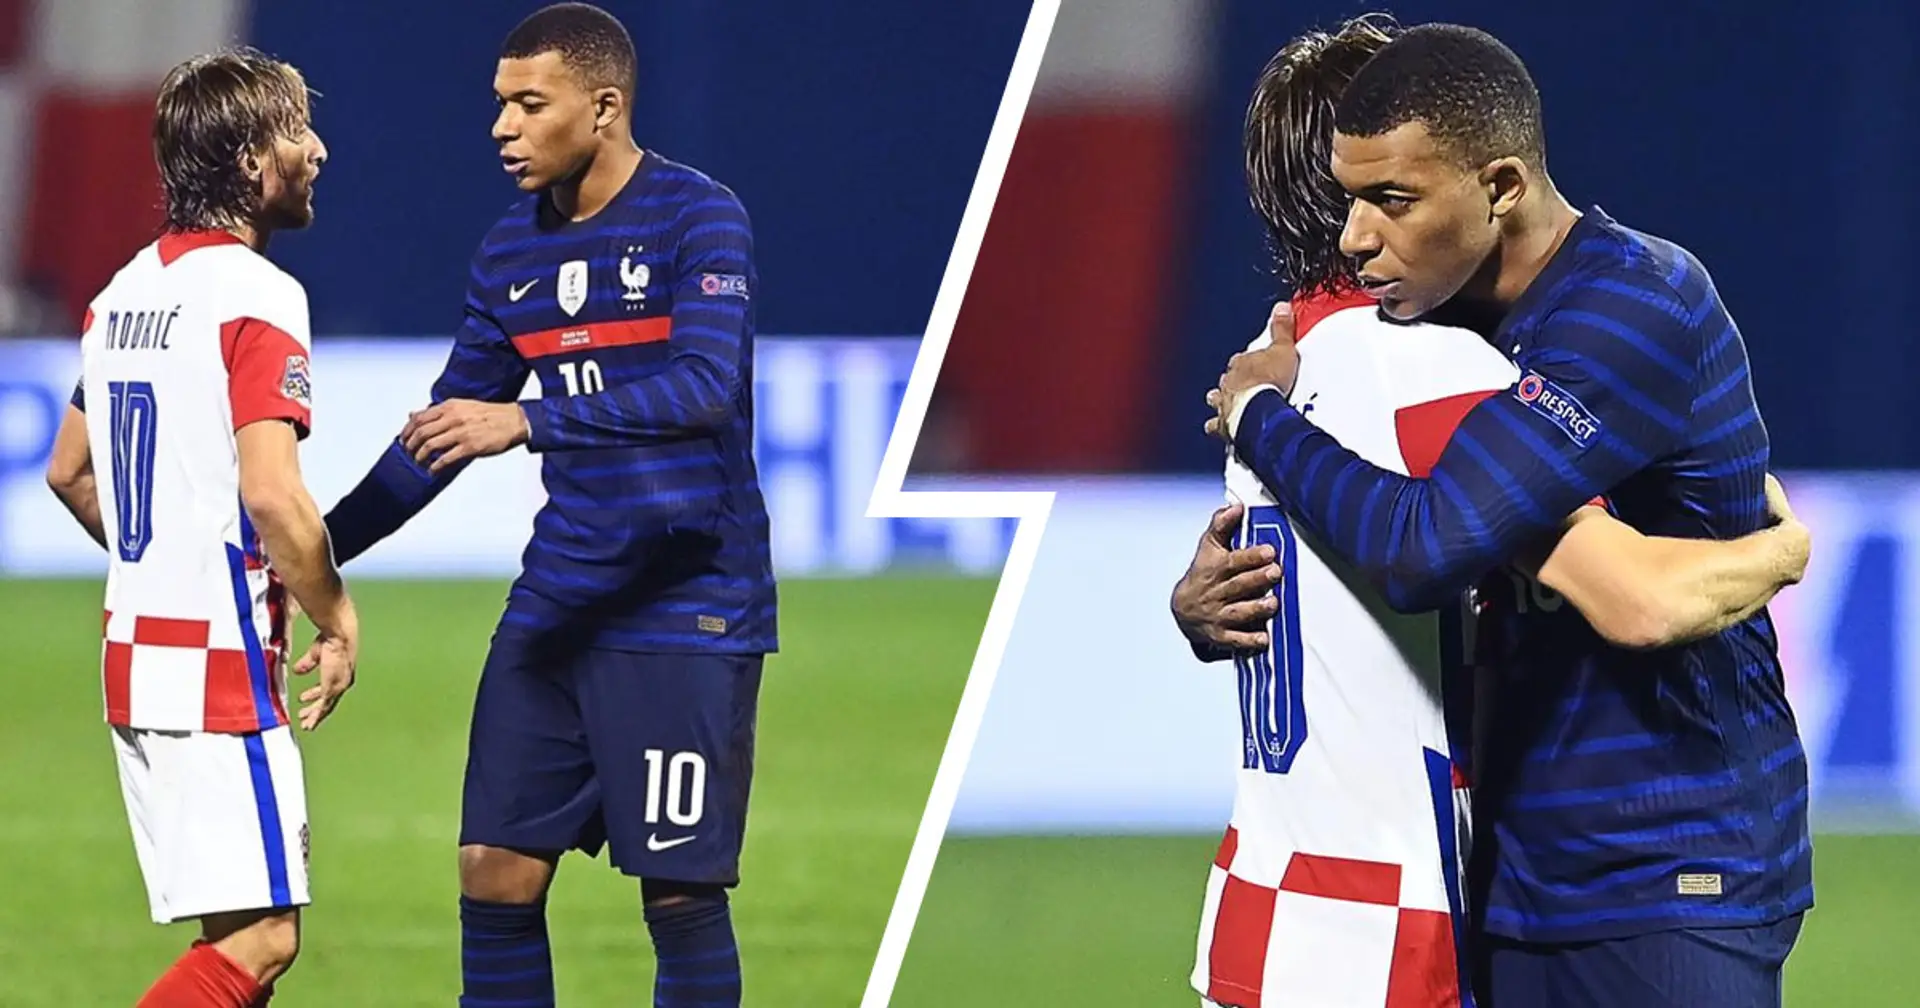 Agent Modric? Luka and Mbappe share brilliant moment after Nations League clash – and fans love it!